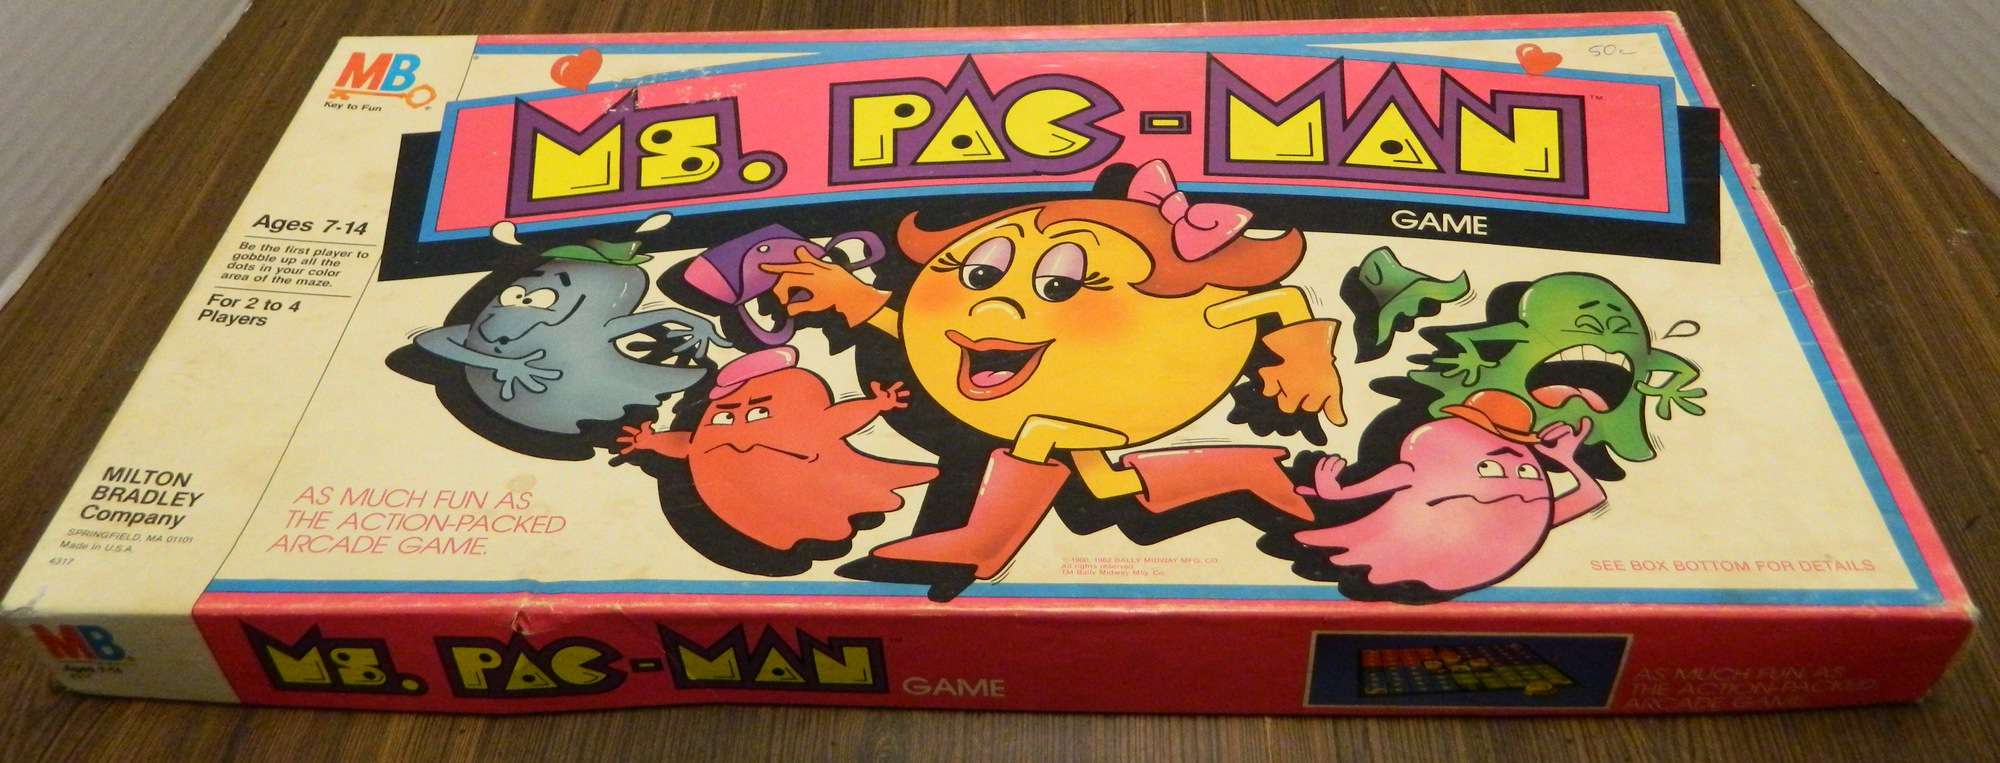 Ms. Pac-Man Board Game Review and Instructions